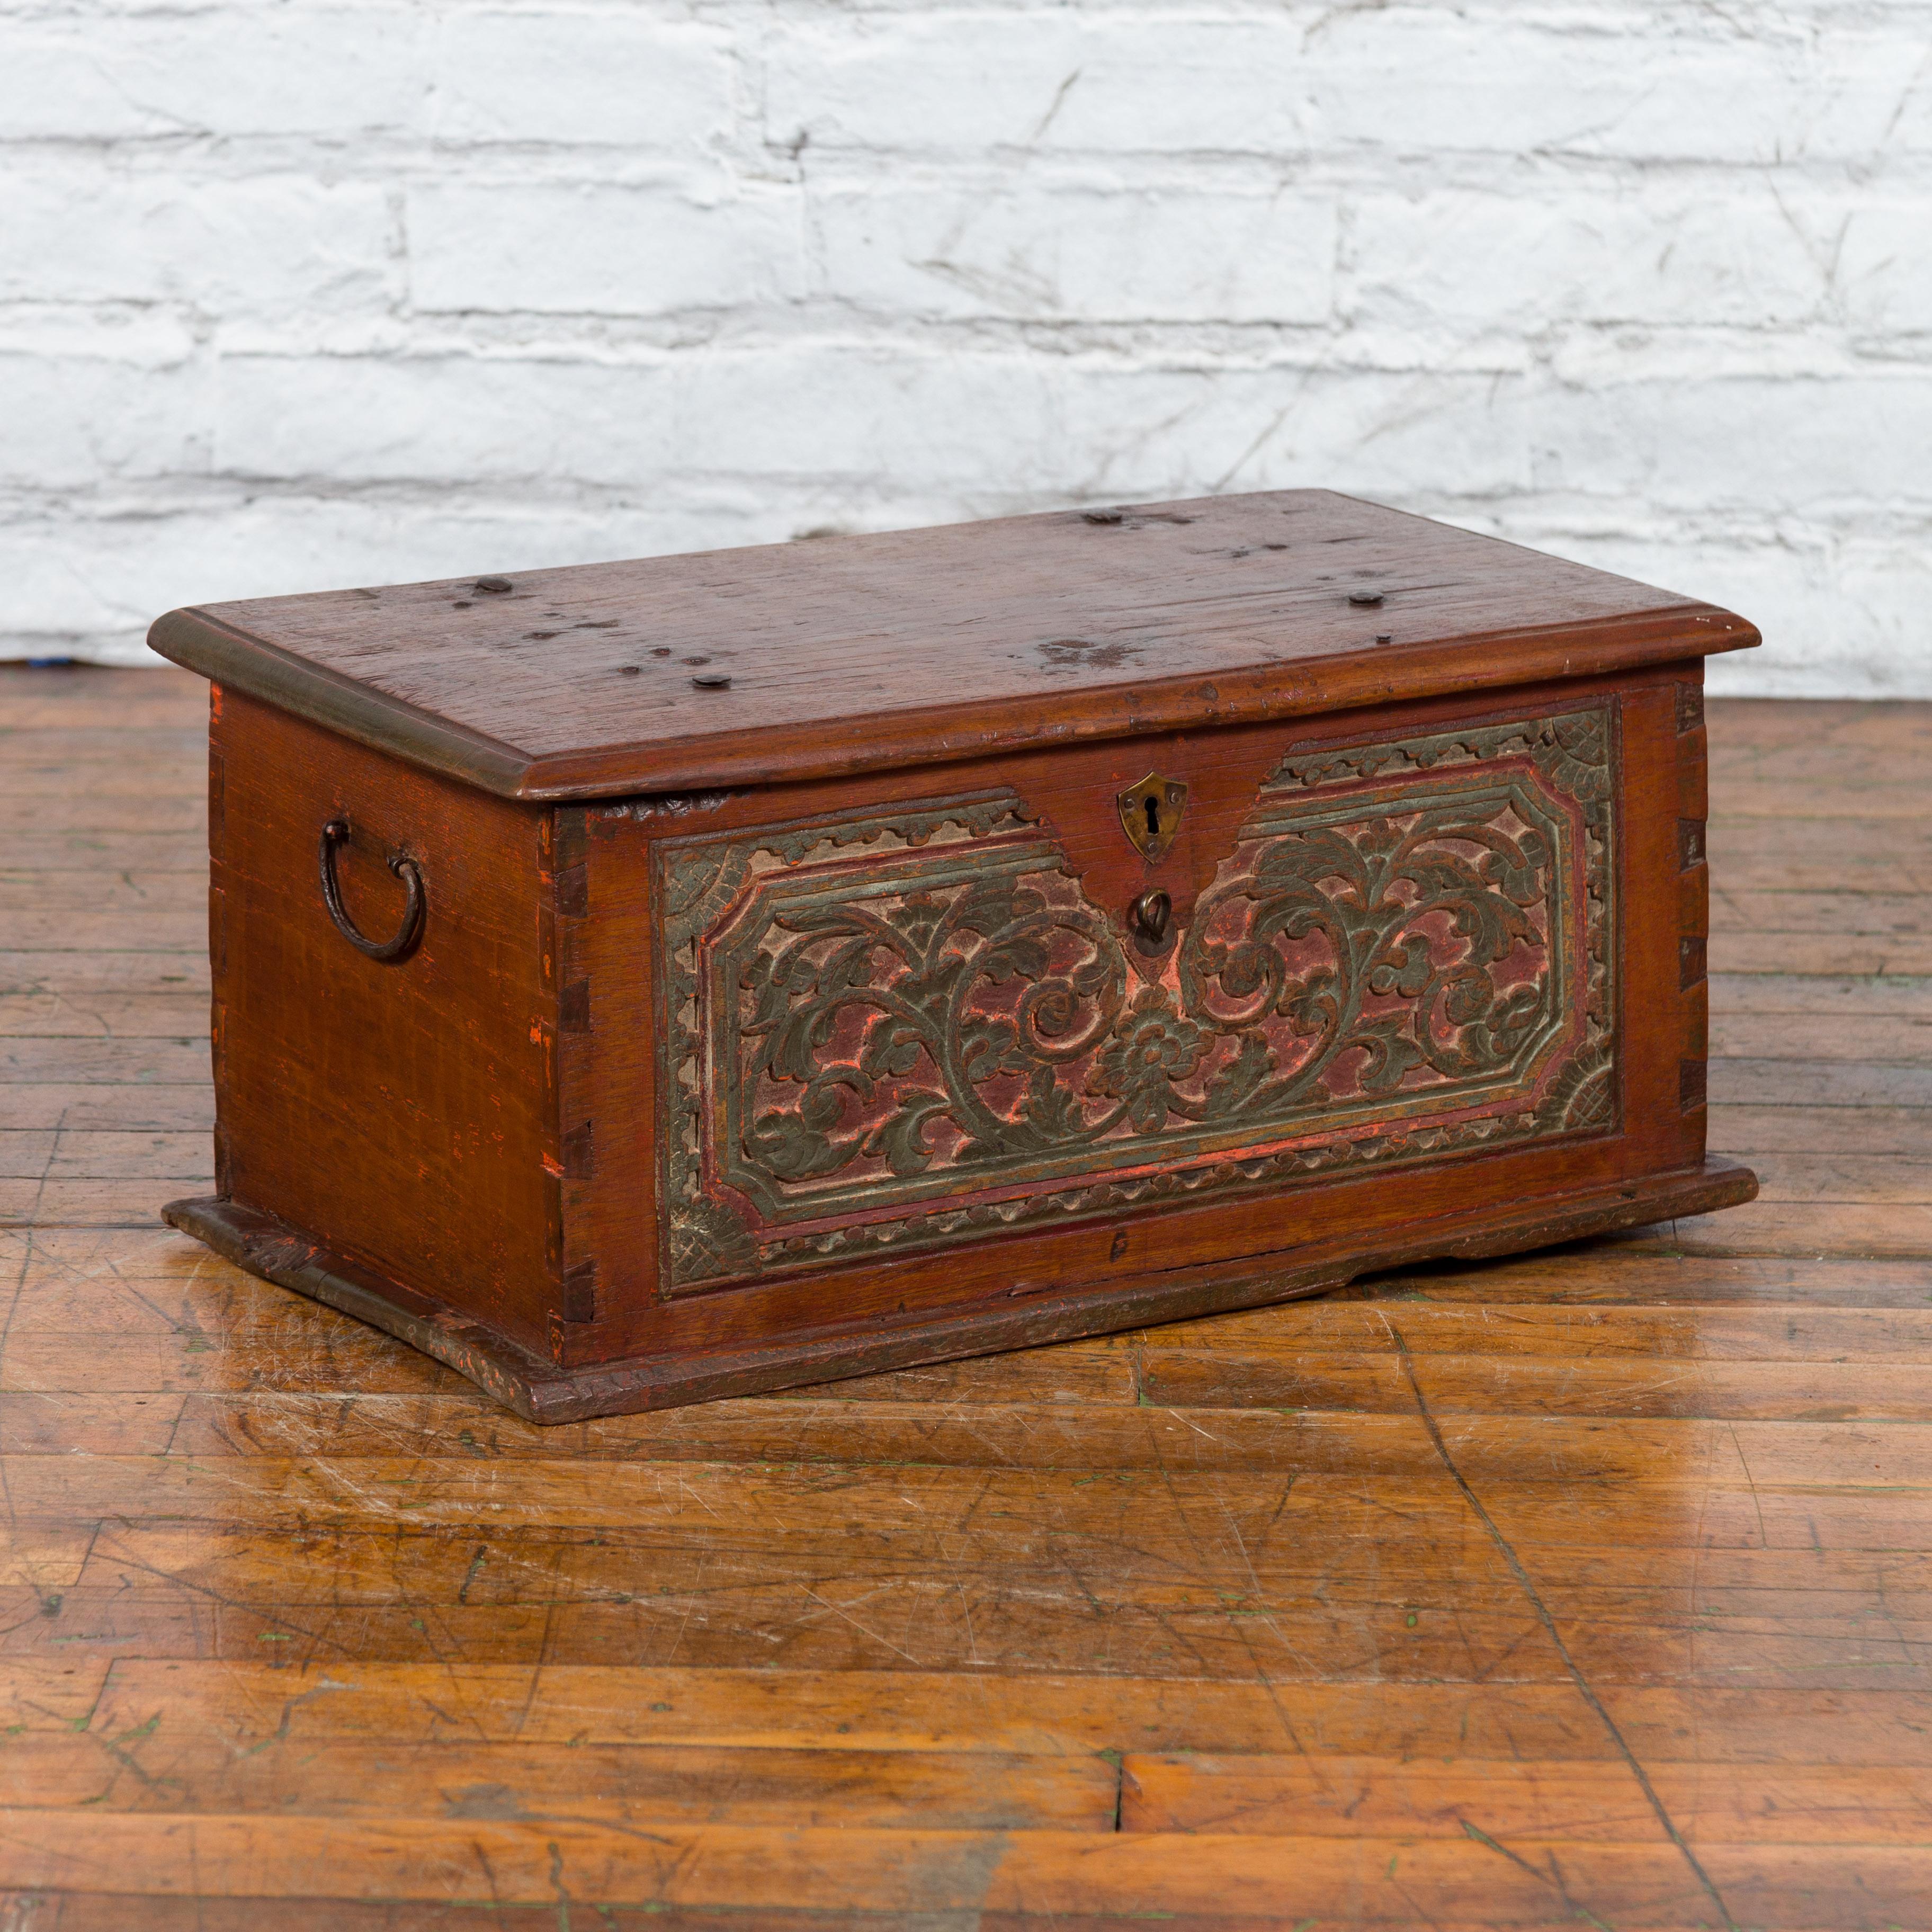 A Javanese teak wood trunk from the 19th century with carved scrolling foliage, green and red painted accents, shield-shaped escutcheon and dovetail construction. Created on the island of Java in the 19th century, this teak (a very sturdy wood)